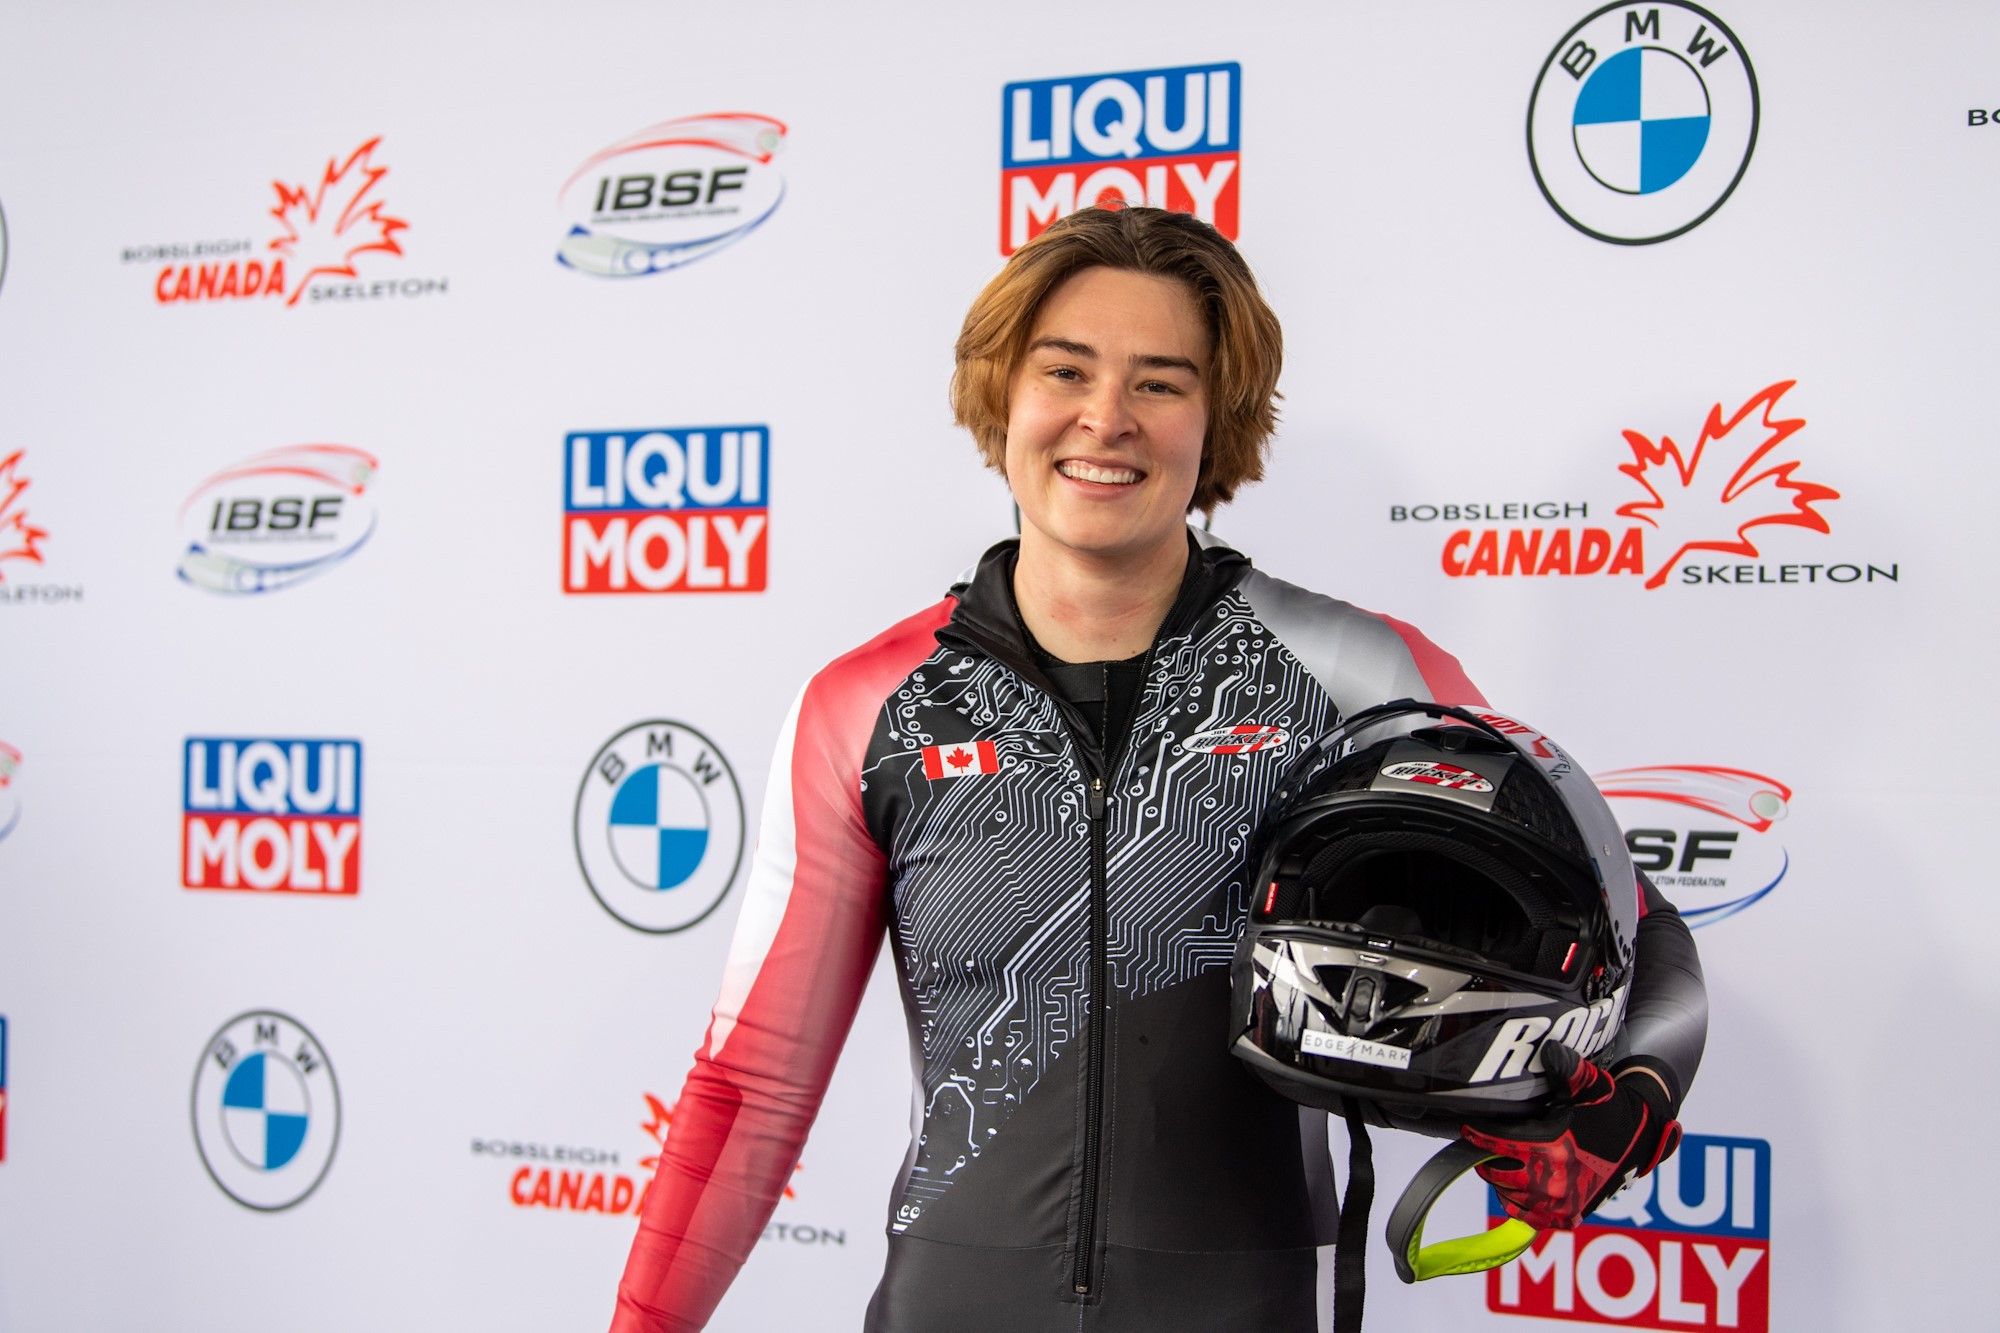 Ribi wins first-ever World Cup monobob gold in Whistler 